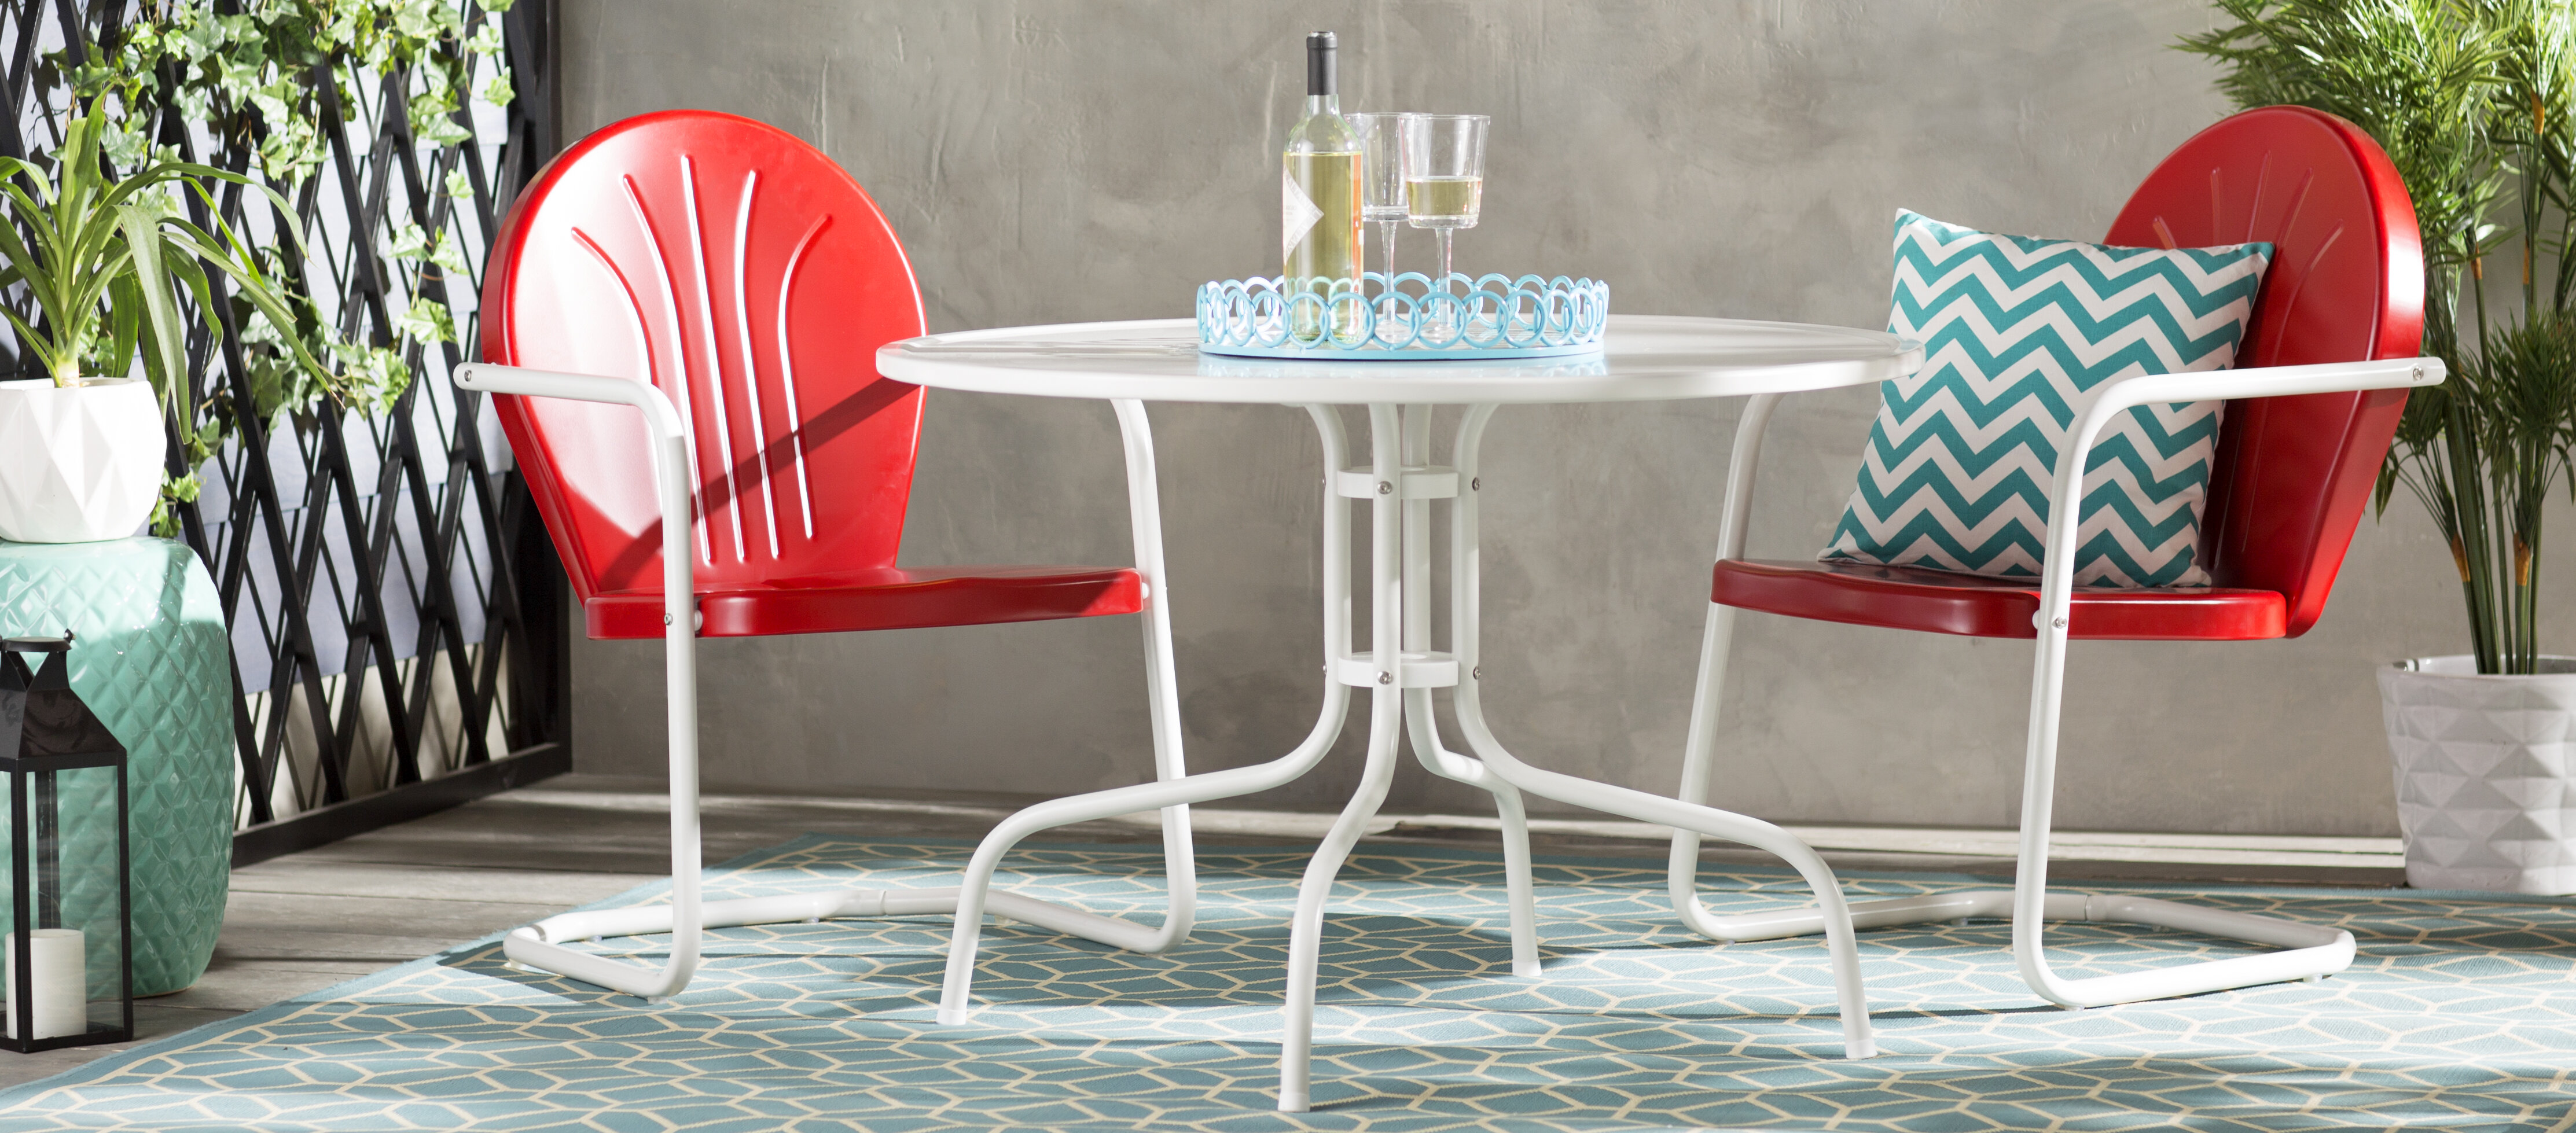 [BIG SALE] Best-Selling Patio Dining Chairs You’ll Love In 2020 | Wayfair